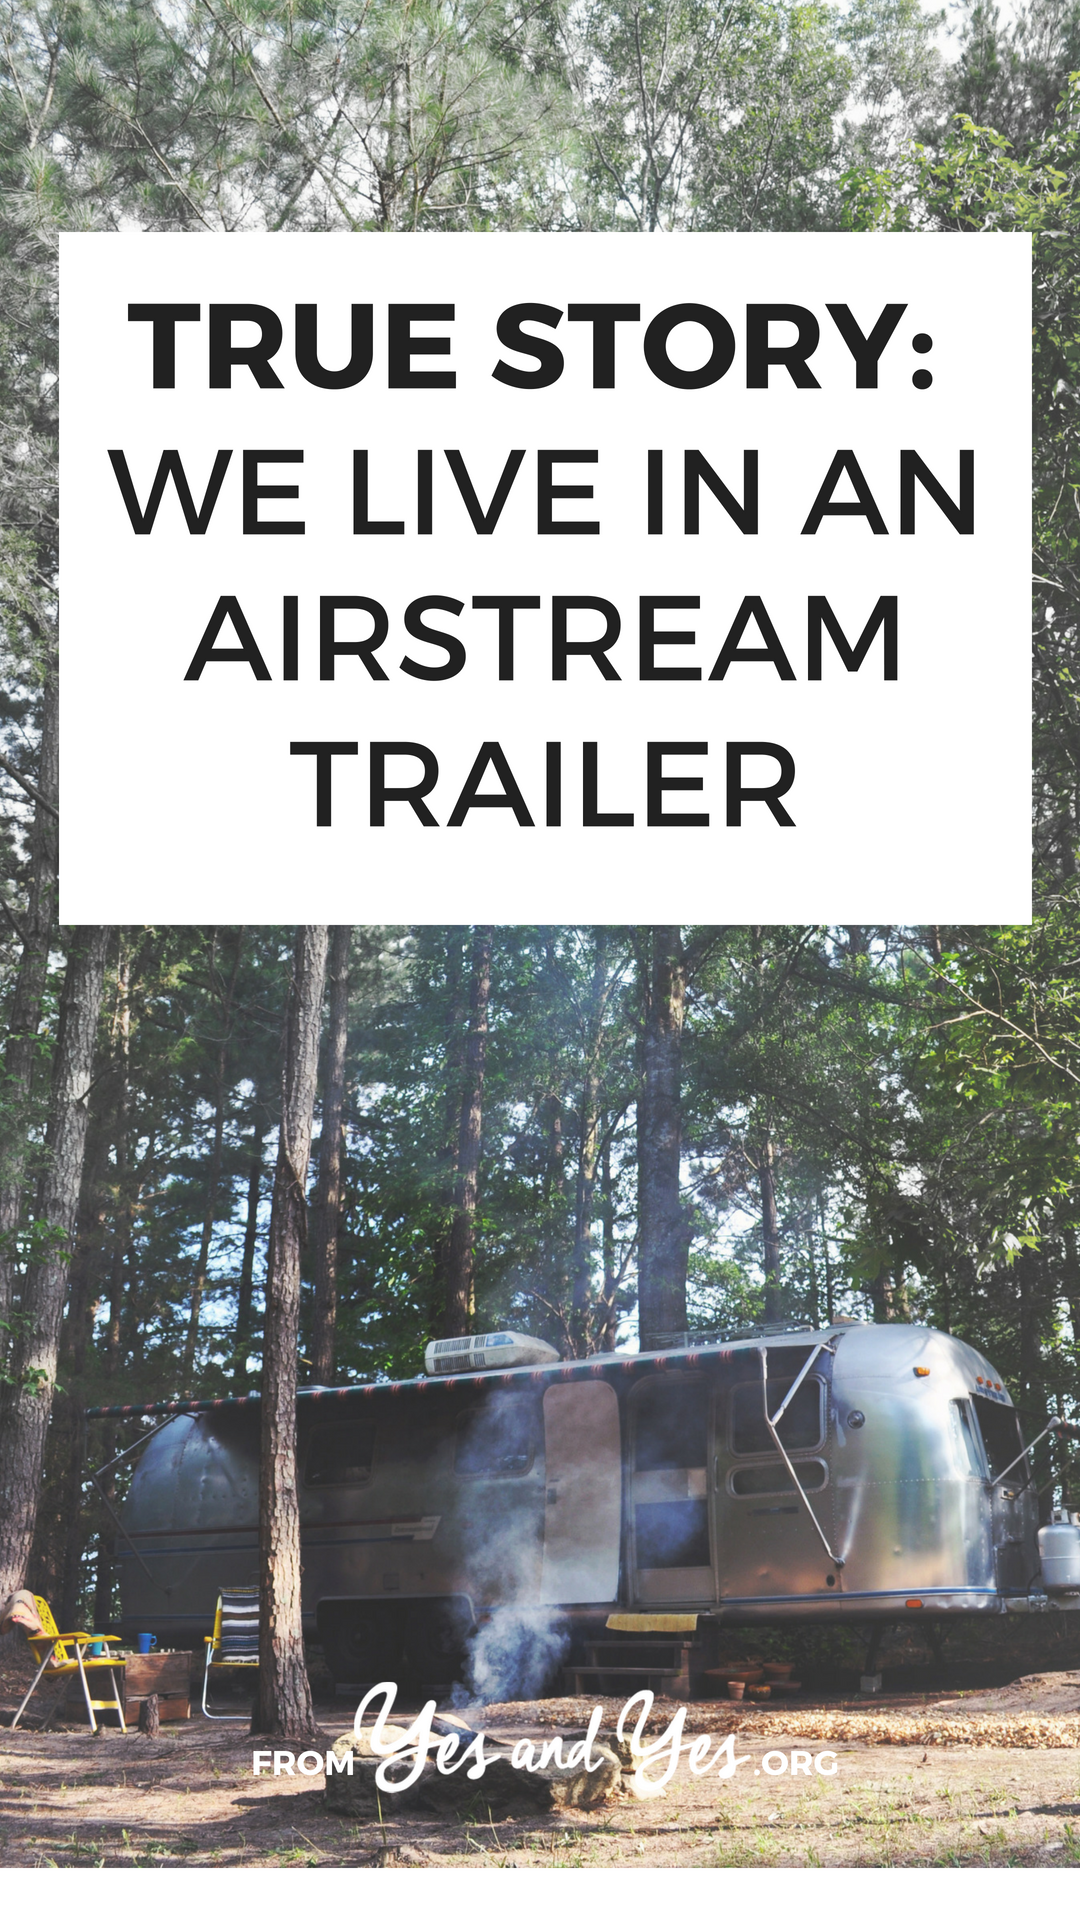 Have you ever fantasized about living in an Airstream? Interested in small space living or minimalism? You'll love this interview! Click through for small space living and decor tips, too!